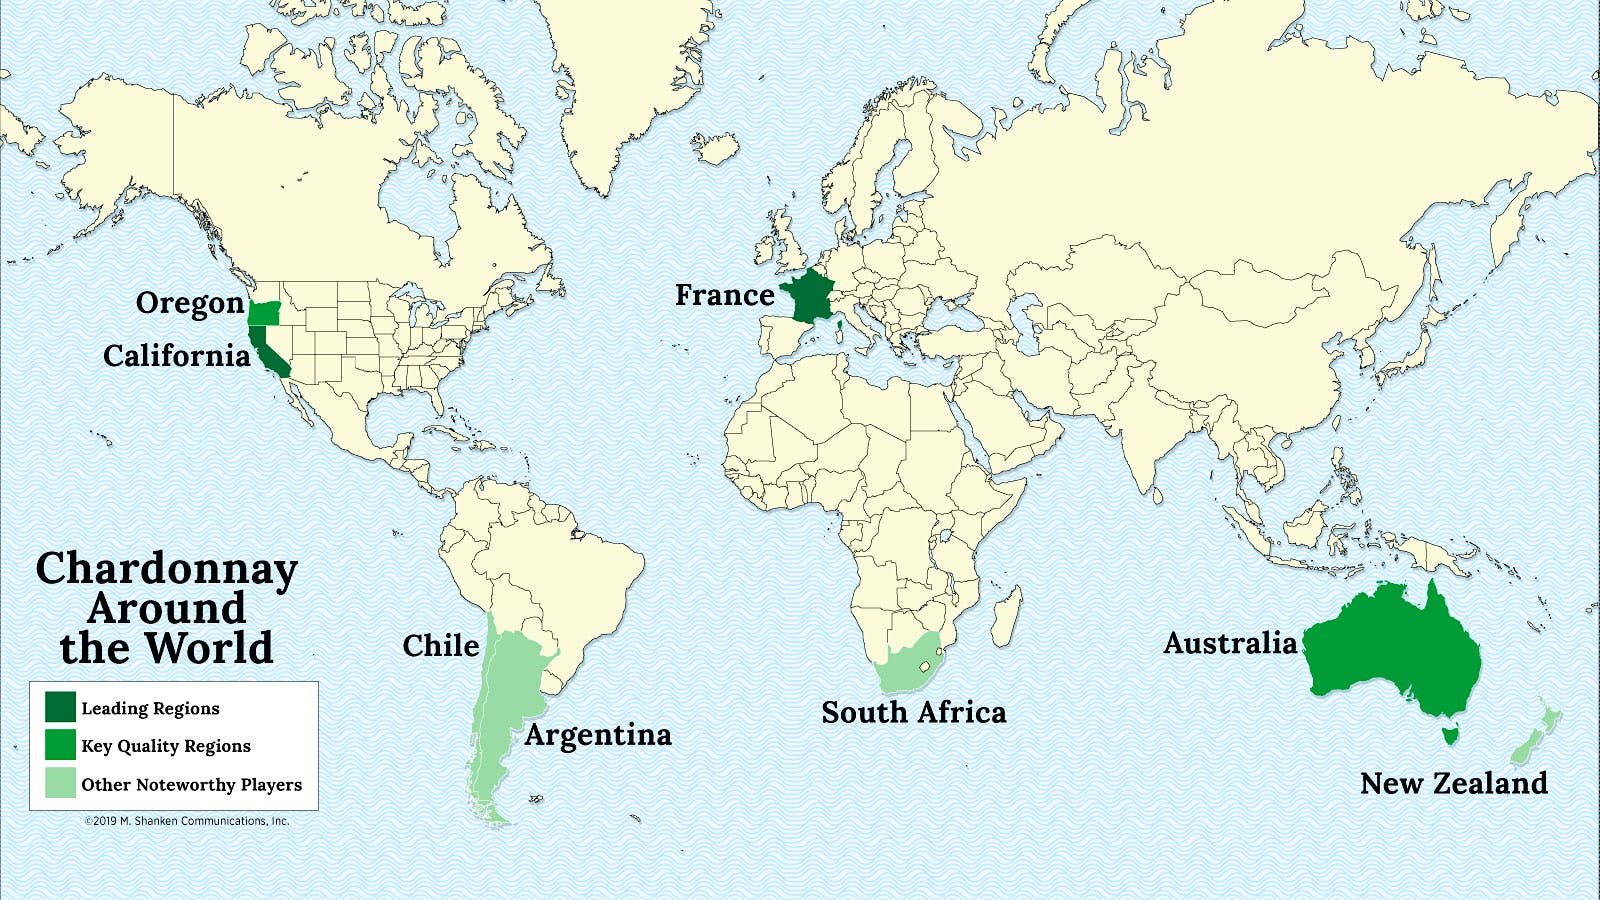 A map of the world with France, California, Oregon, Australia, New Zealand, South Africa, Chile and Argentina highlighted